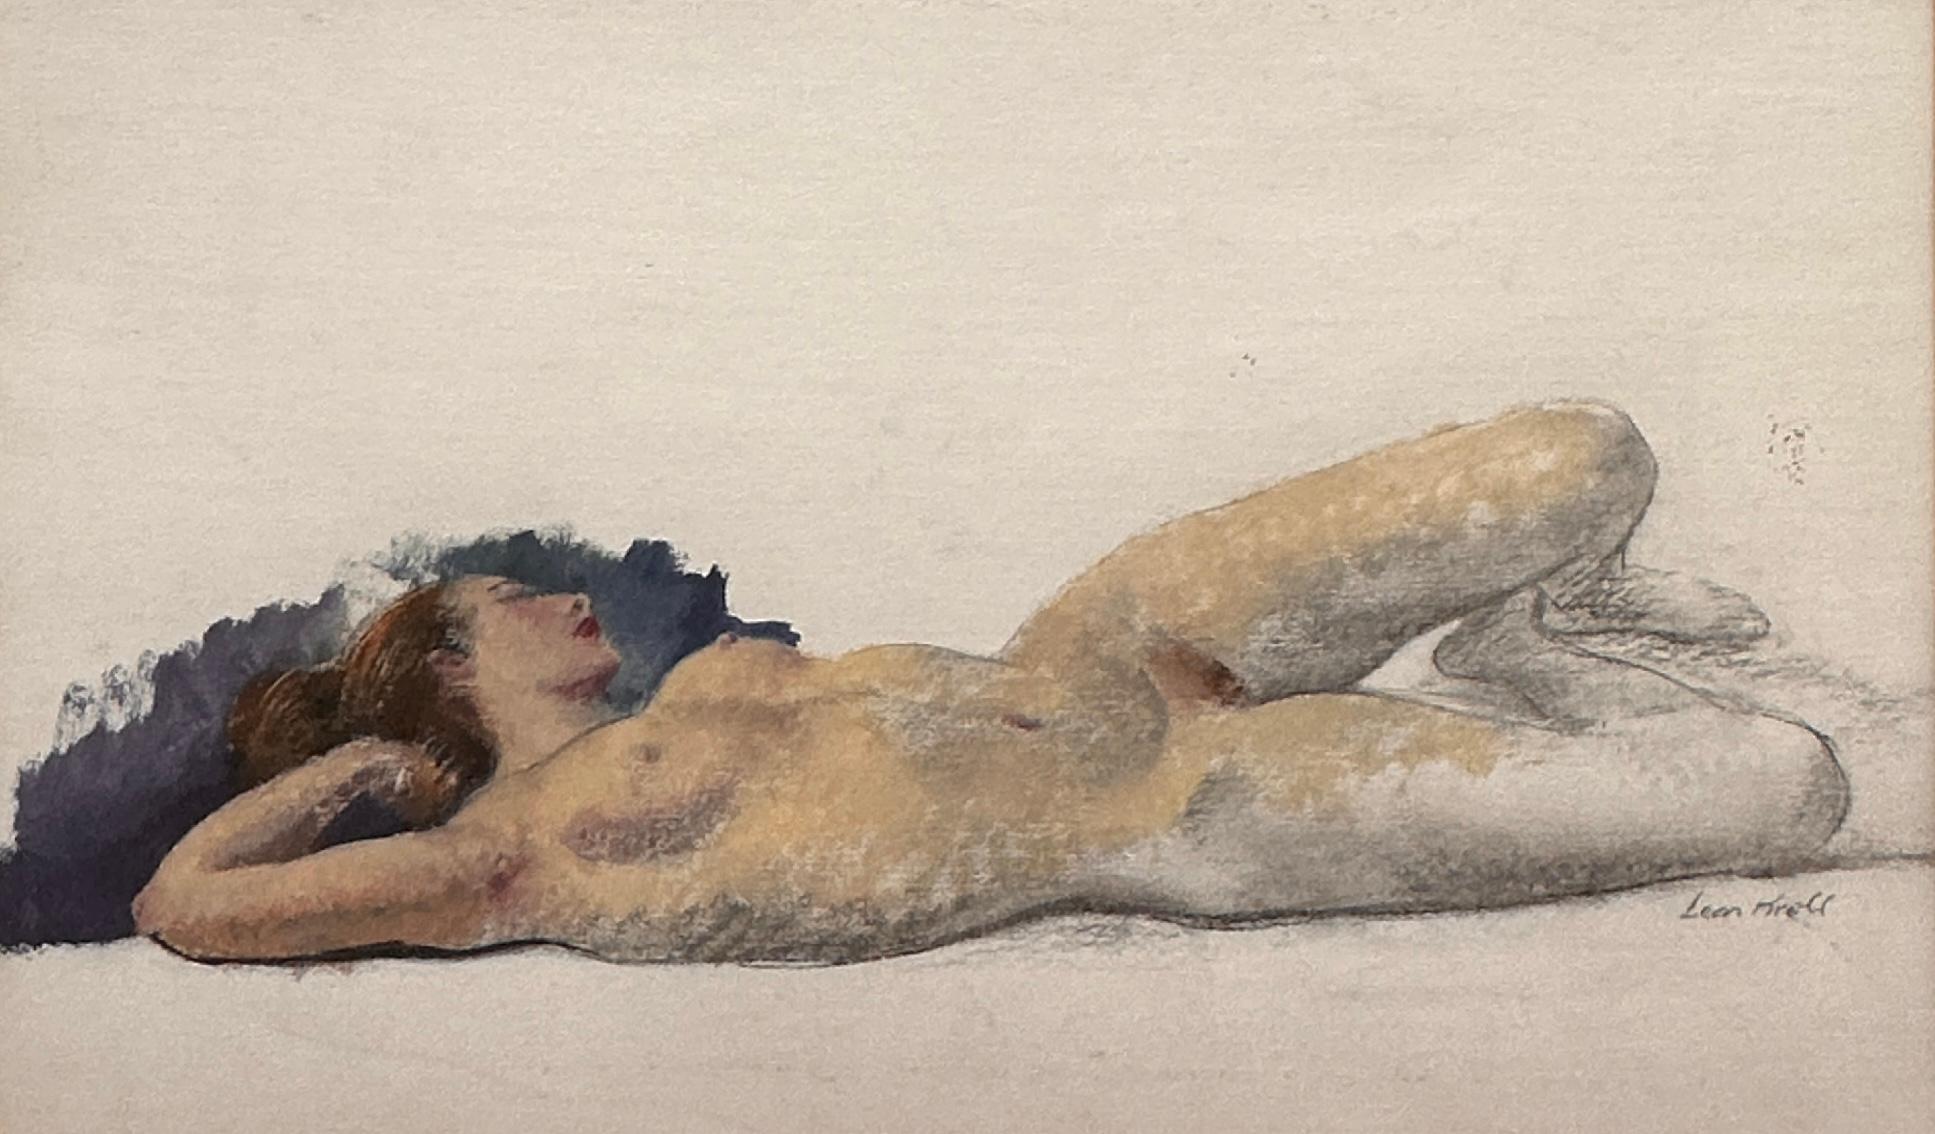 Reclining Nude is nude model figure painting of charcoal & paint on paper - Mixed Media Art by Leon Kroll